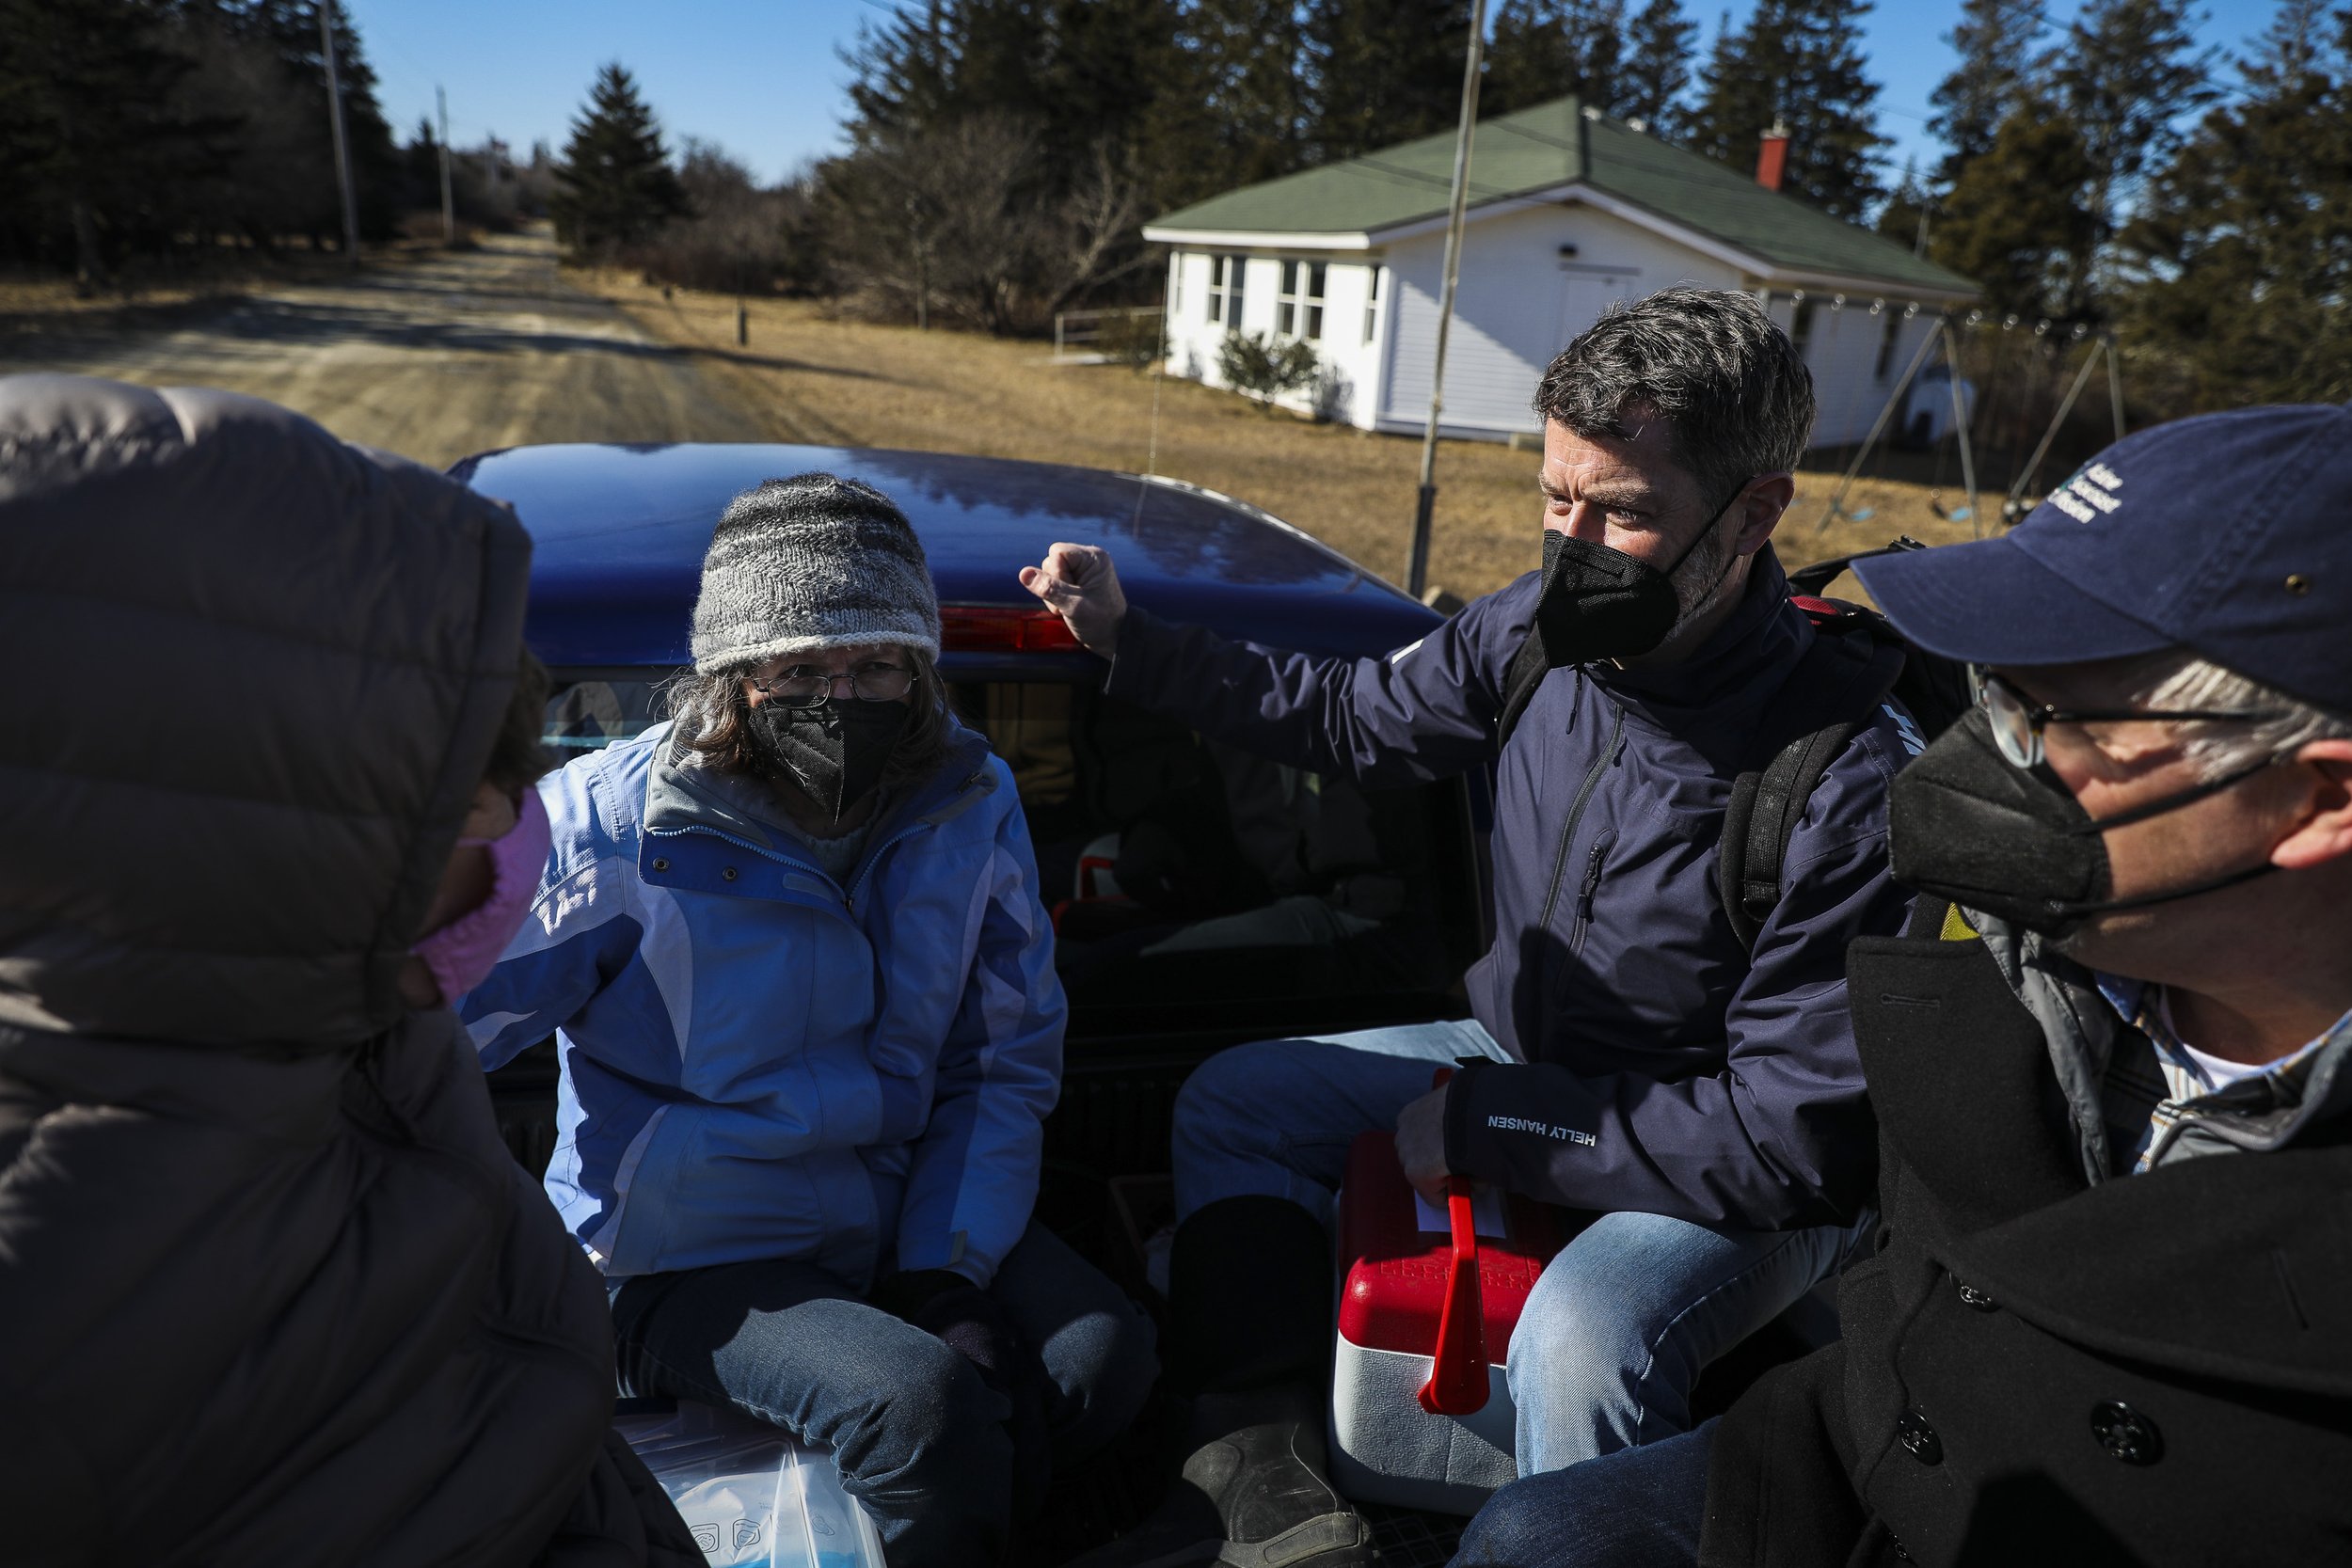  The Seacoast Mission crew, from left RN Maureen Giffin, RN and and director of island health services Sharon Daley,  Island Outreach Director and Chaplain Douglas Cornman, and Seacoast Mission President John Zavodny cram into the back of a pickup tr